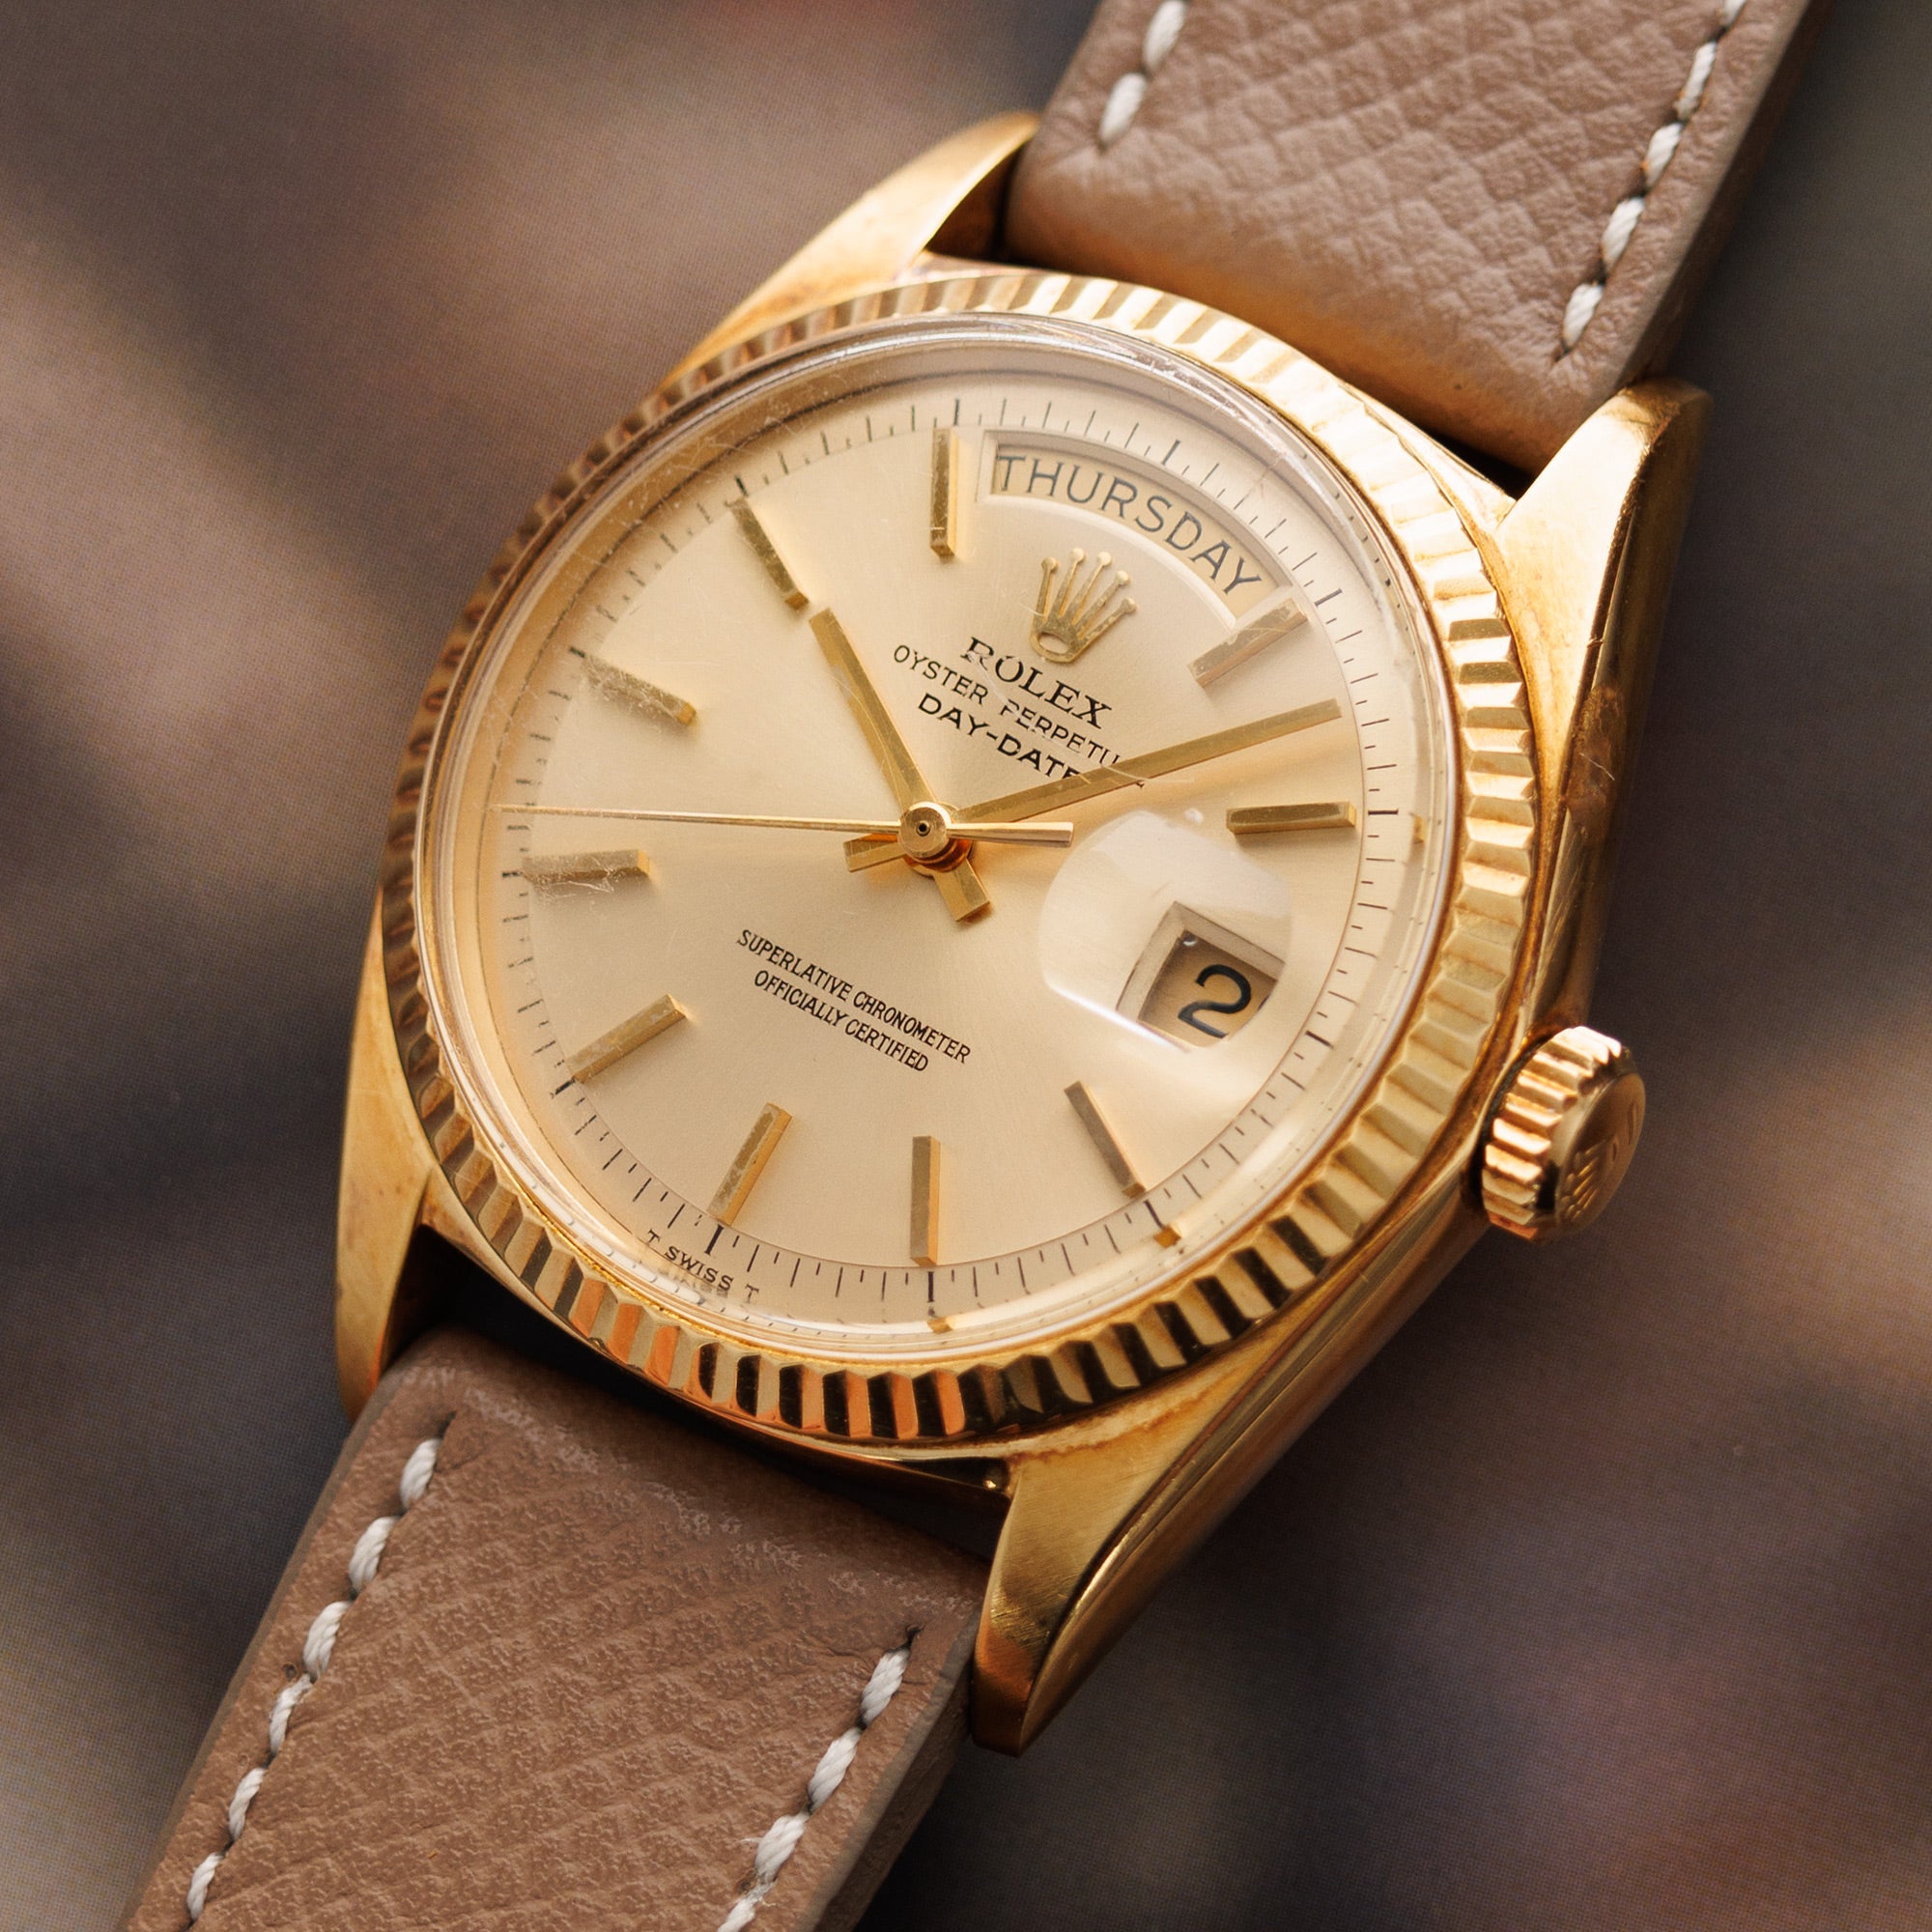 Rolex - Rolex Yellow Gold Day-Date Ref. 1803 - The Keystone Watches